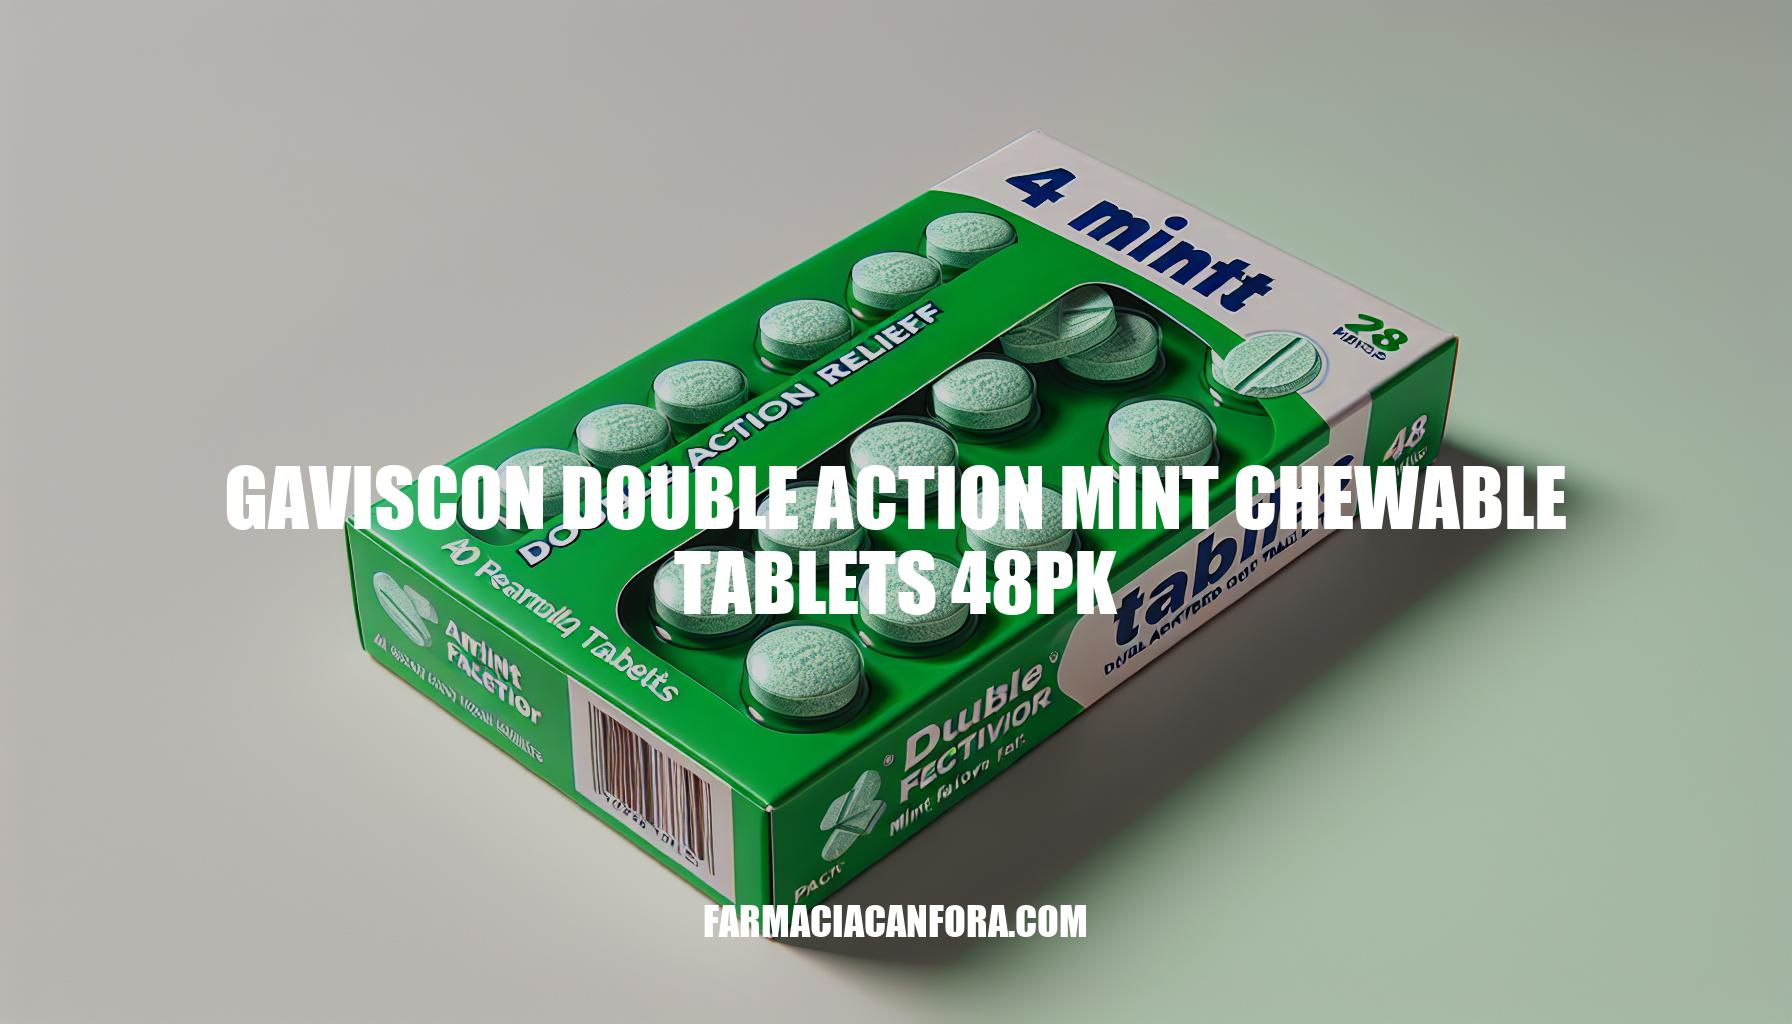 Gaviscon Double Action Mint Chewable Tablets 48pk: Benefits and How to Use